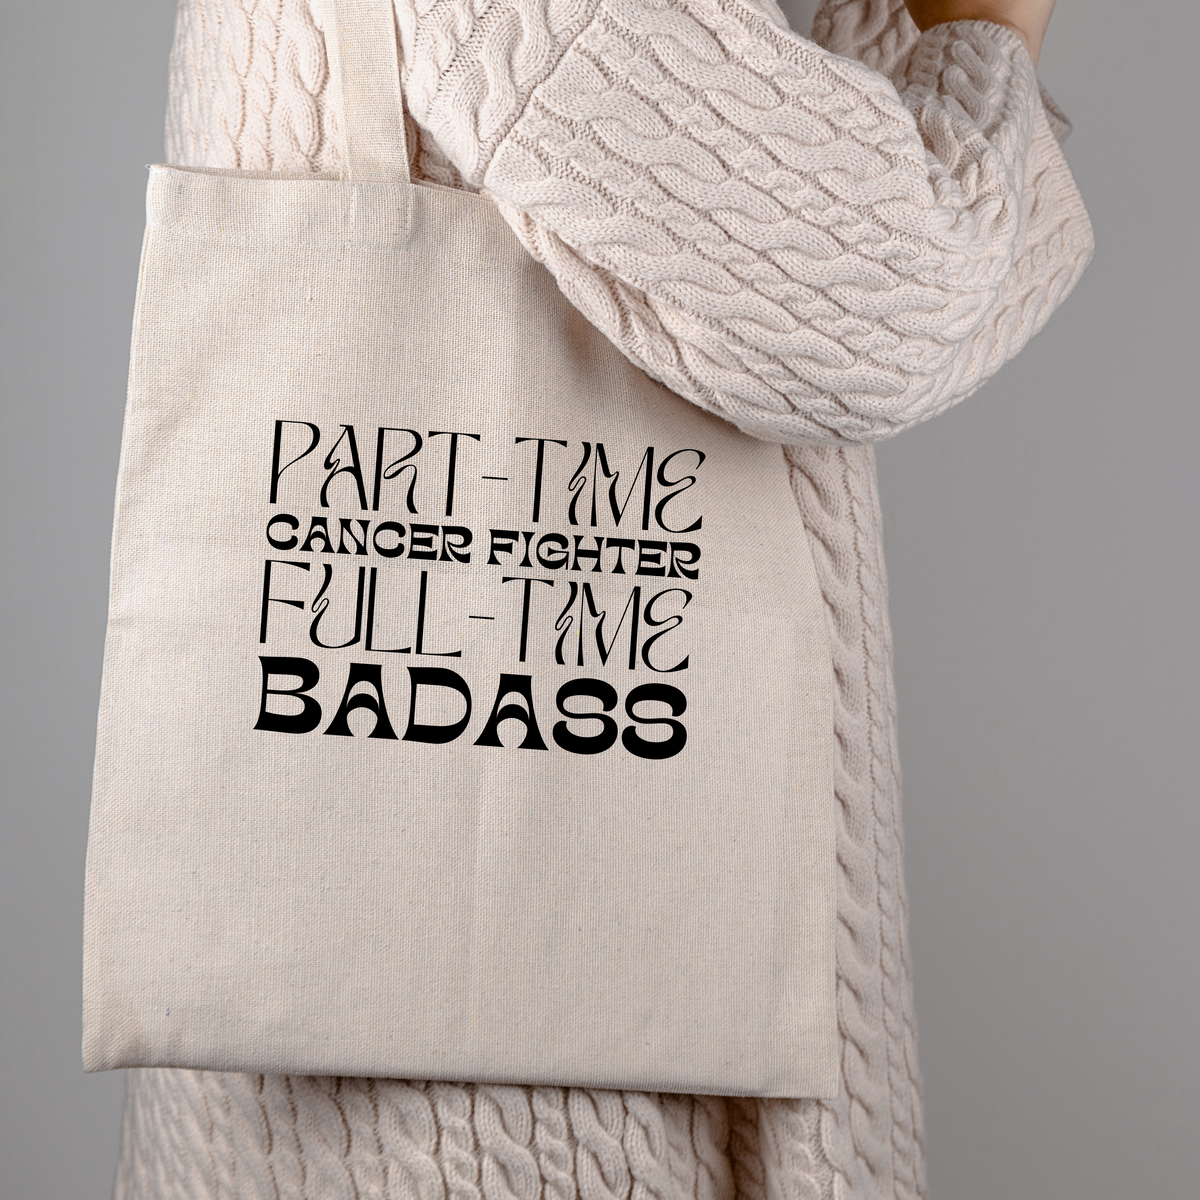 Badass Fighter Tote Bag